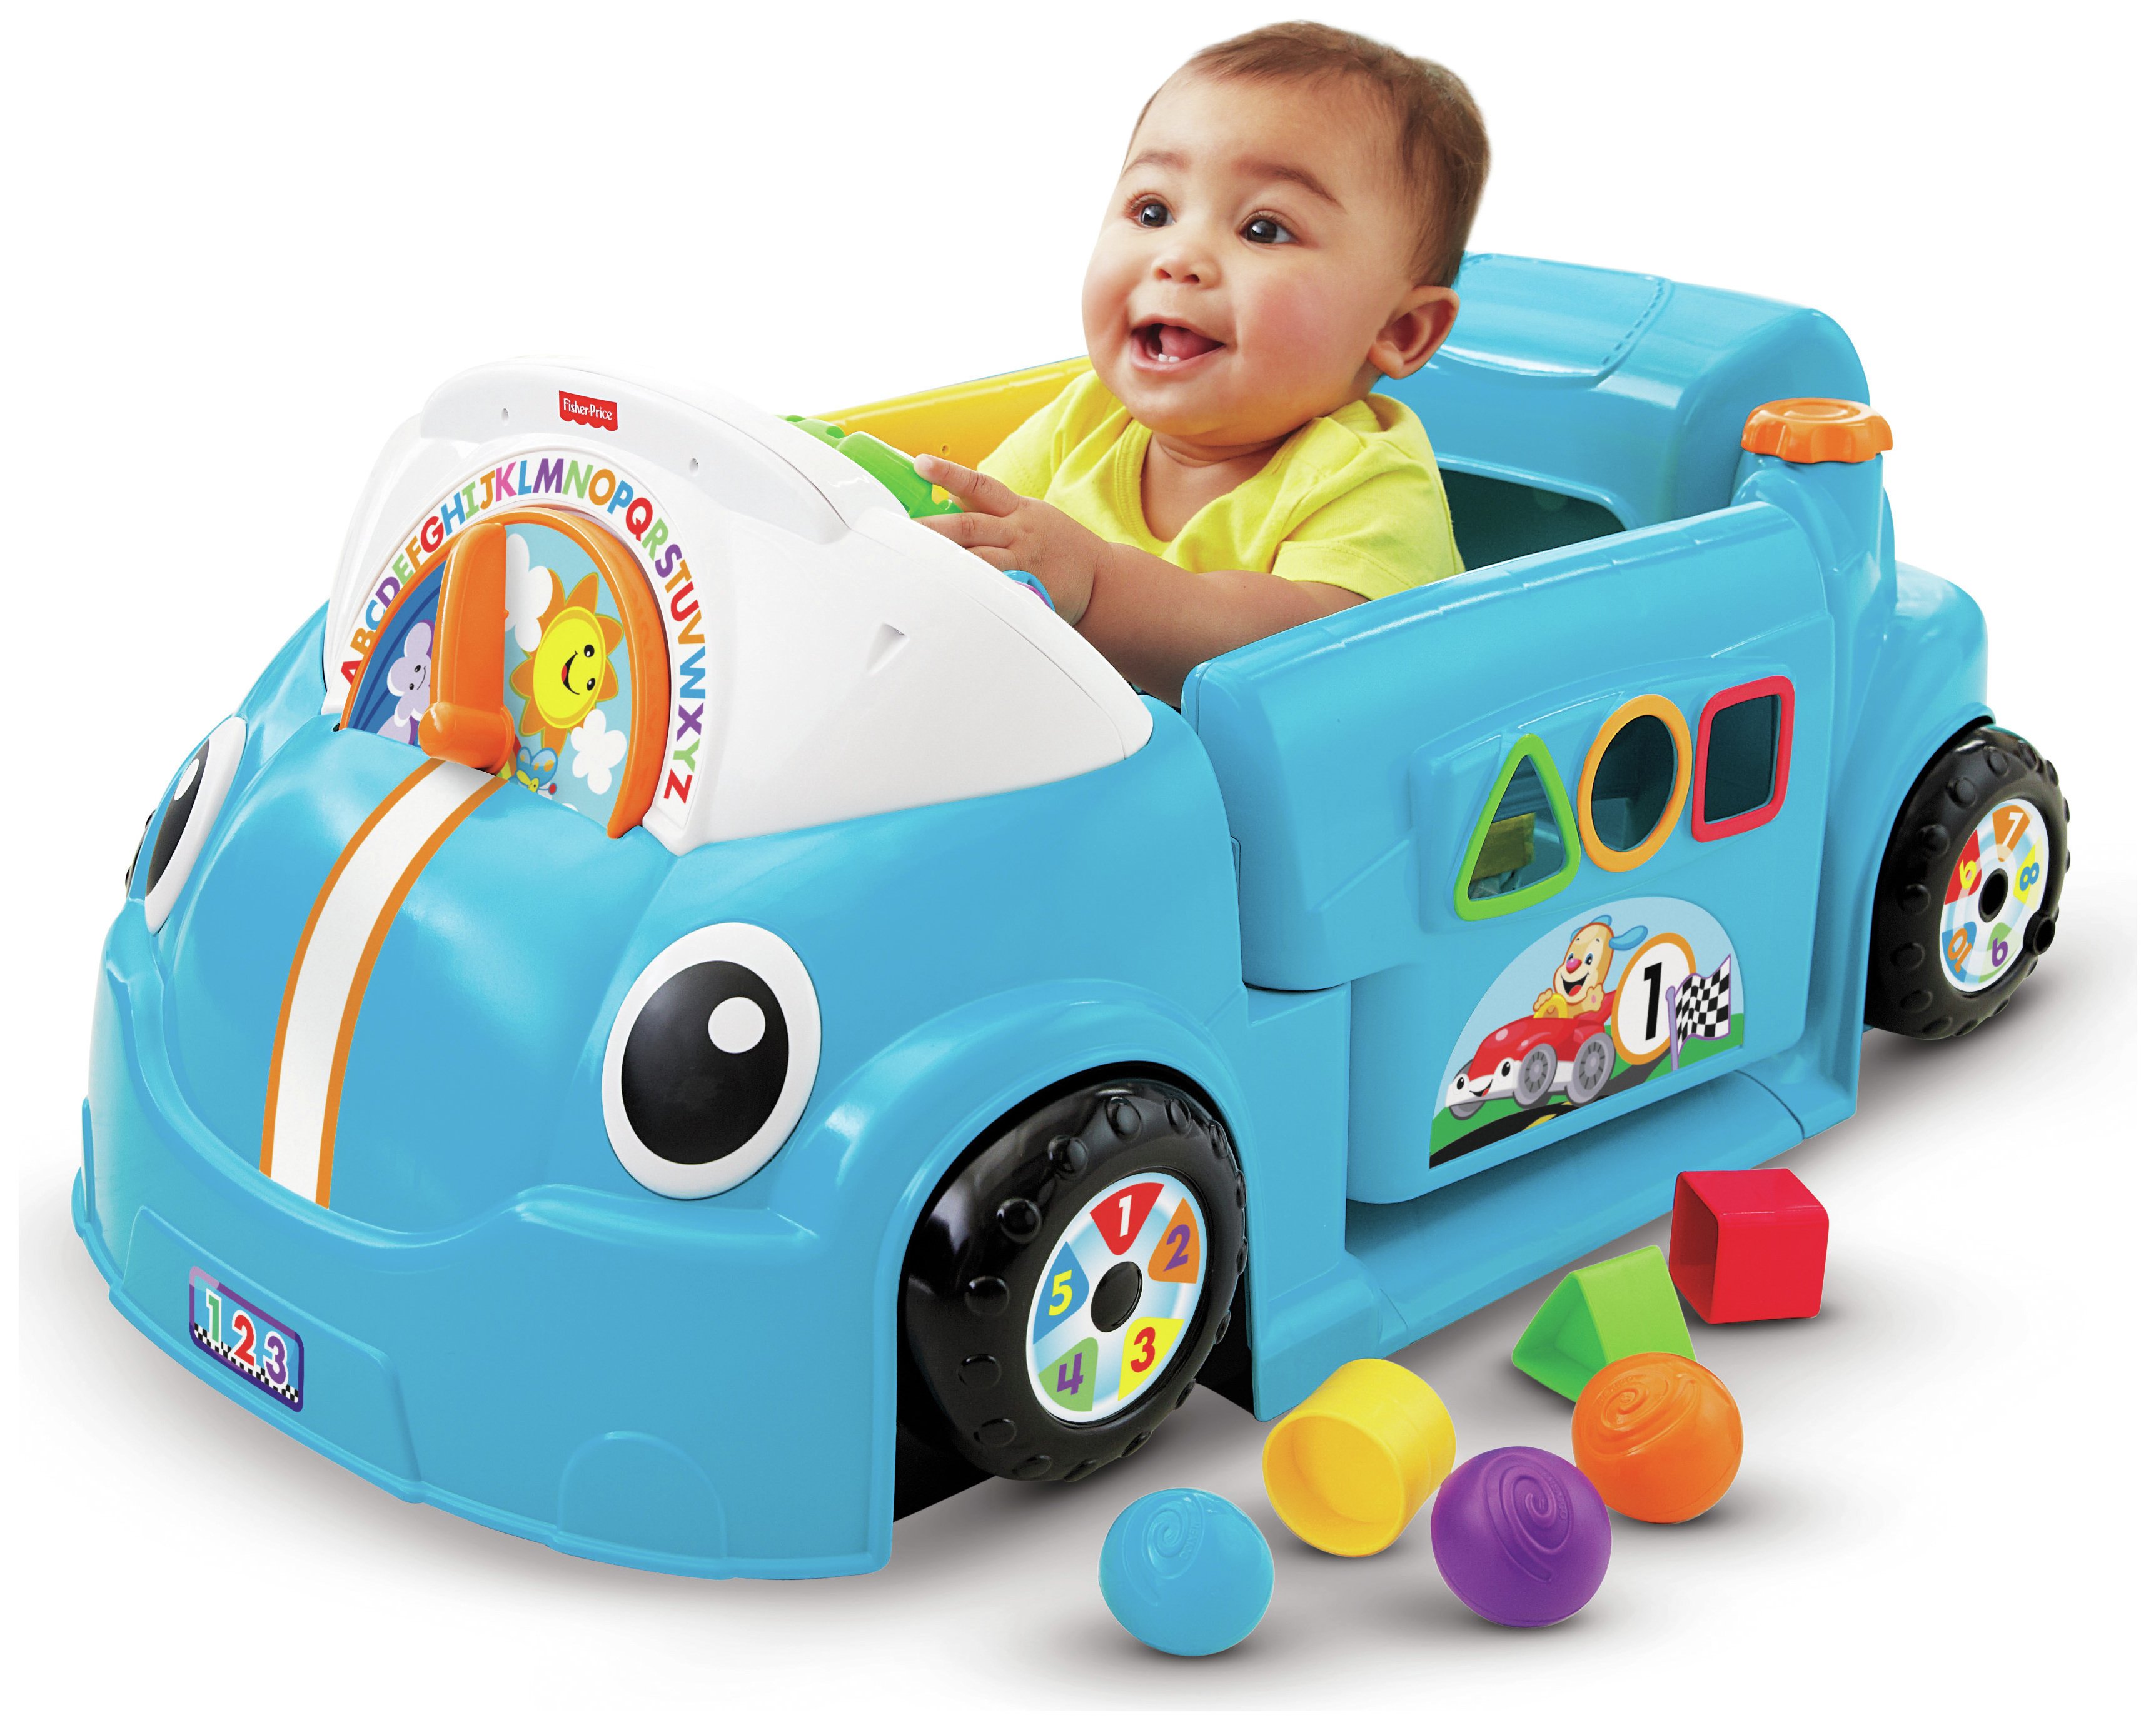 fisher price laugh and learn crawl car